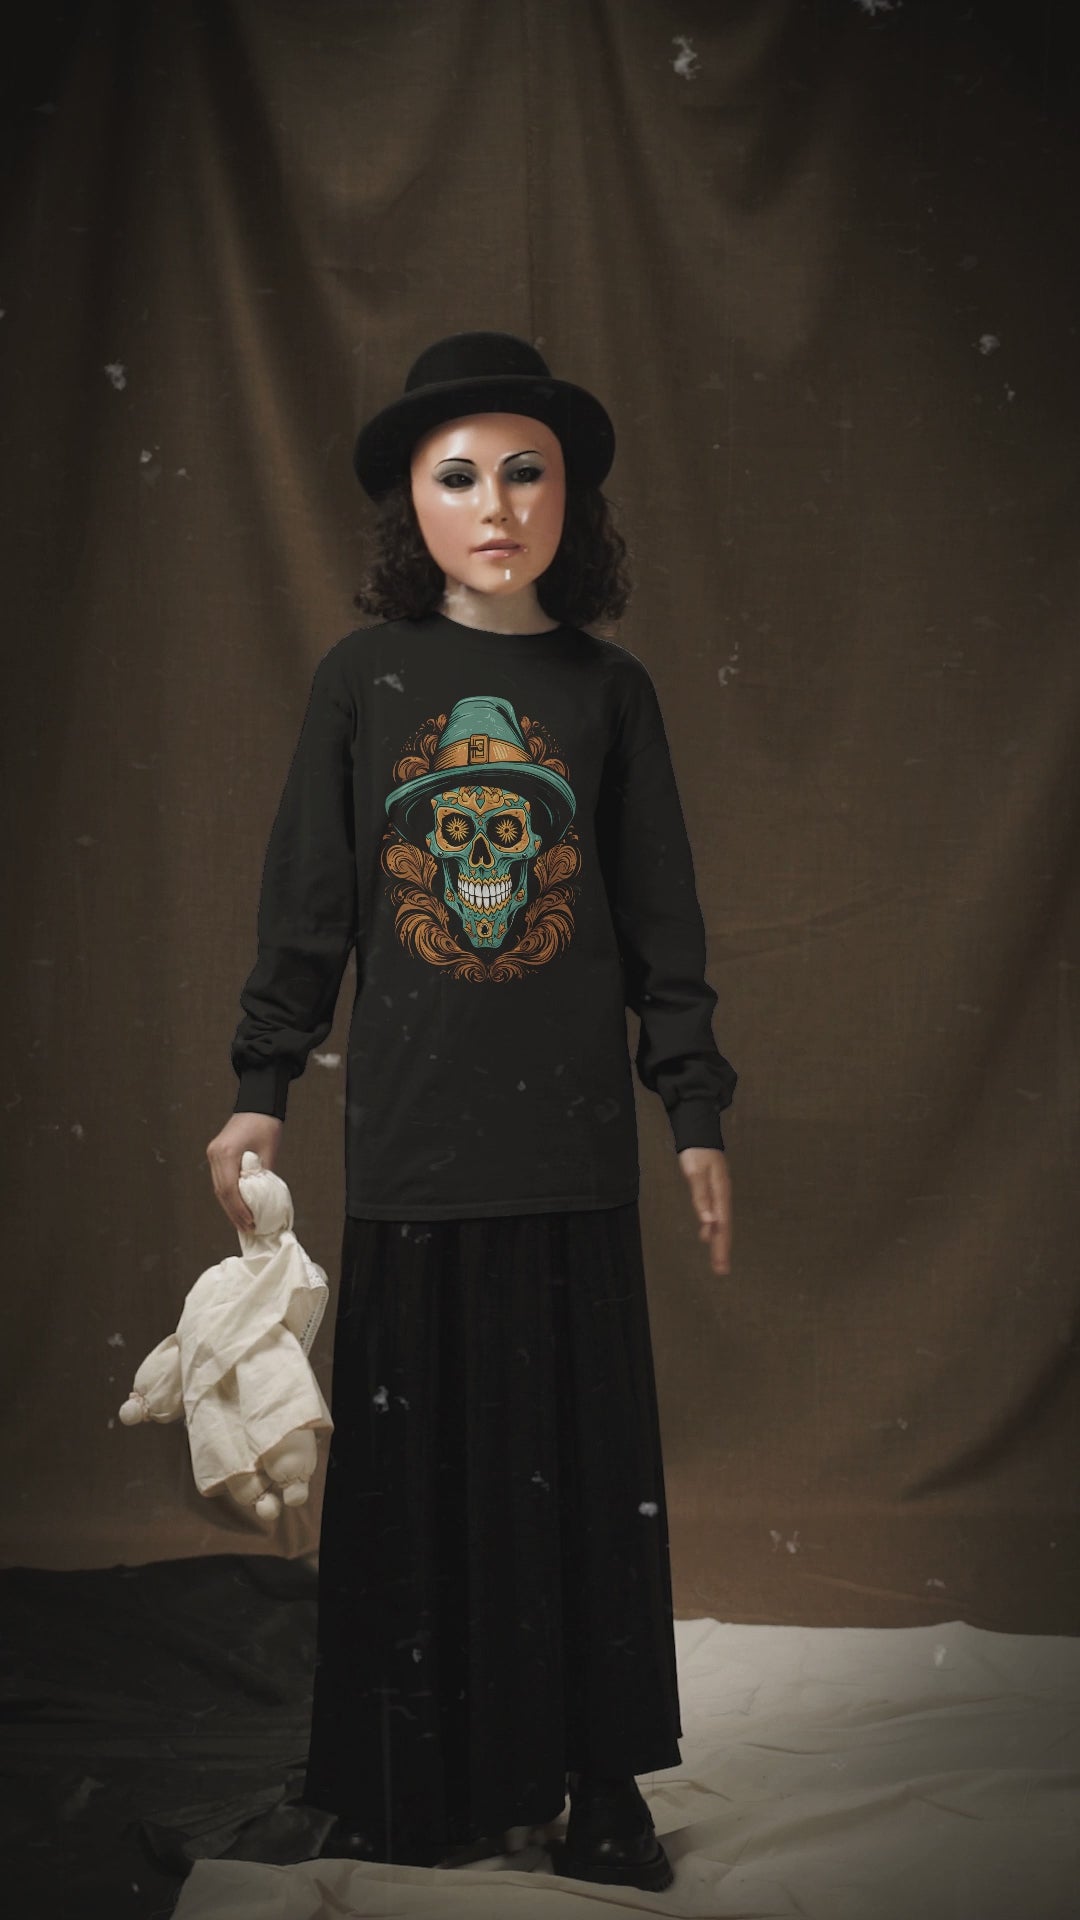 Embrace Mexican Halloween vibes with our Skull and Teal Top Hat Kids Tee! Perfect for young trick-or-treaters, it's a blend of spooky and festive. #HalloweenFashion #MexicanVibes